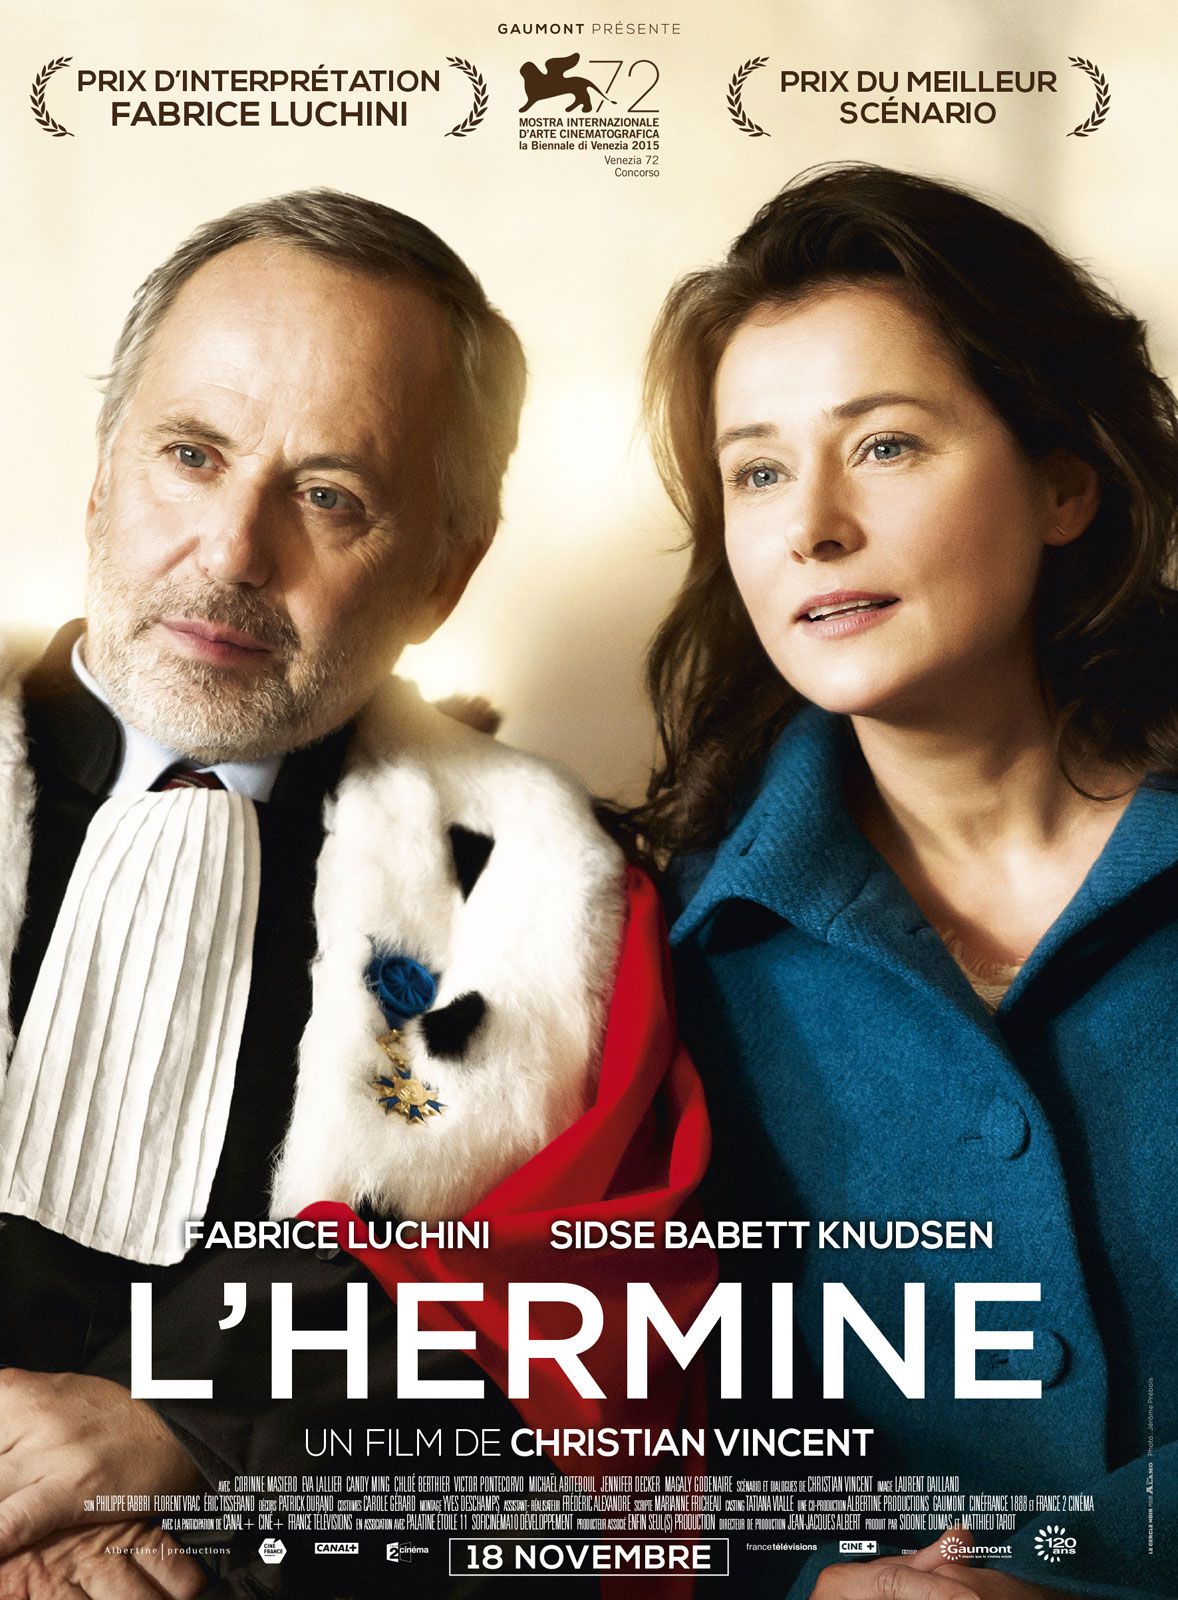 L'Hermine - Film (2015) streaming VF gratuit complet